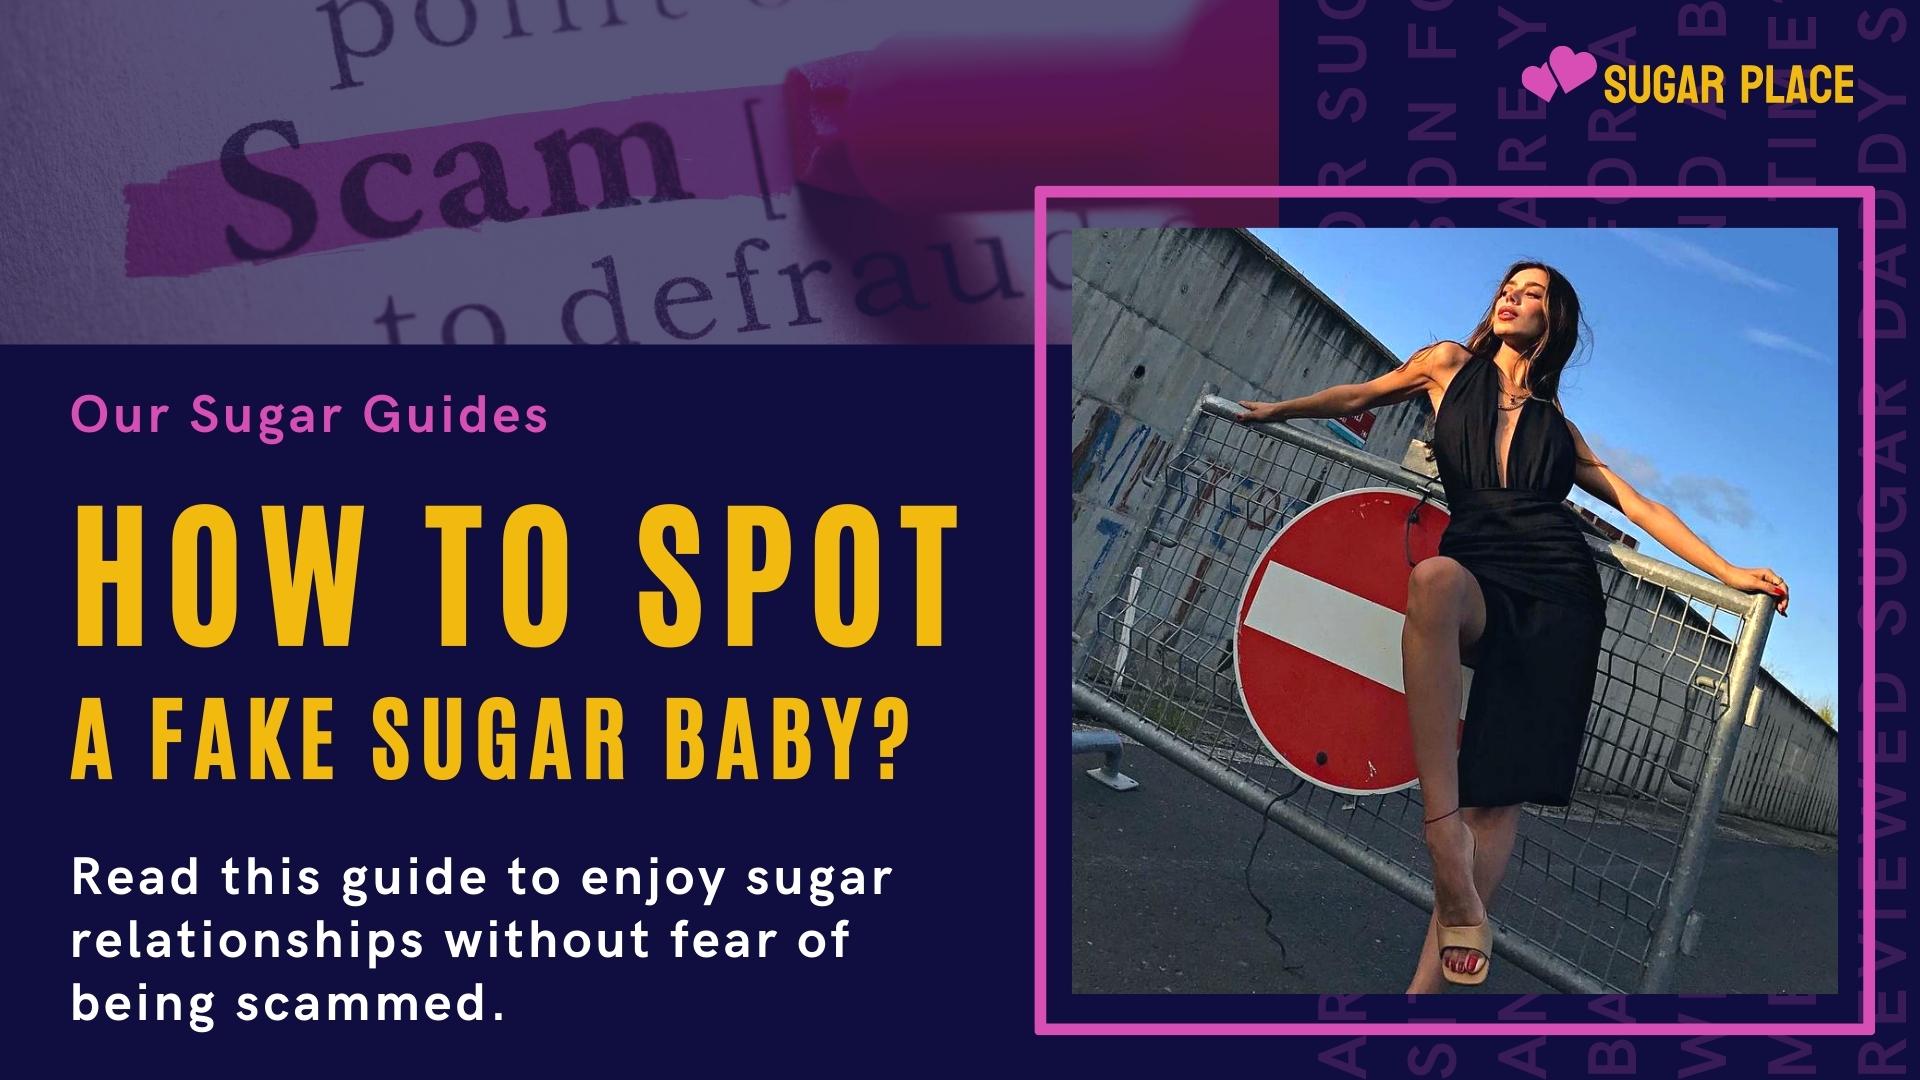 How To Spot A Fake Sugar Baby: All About Sugar Baby Scams